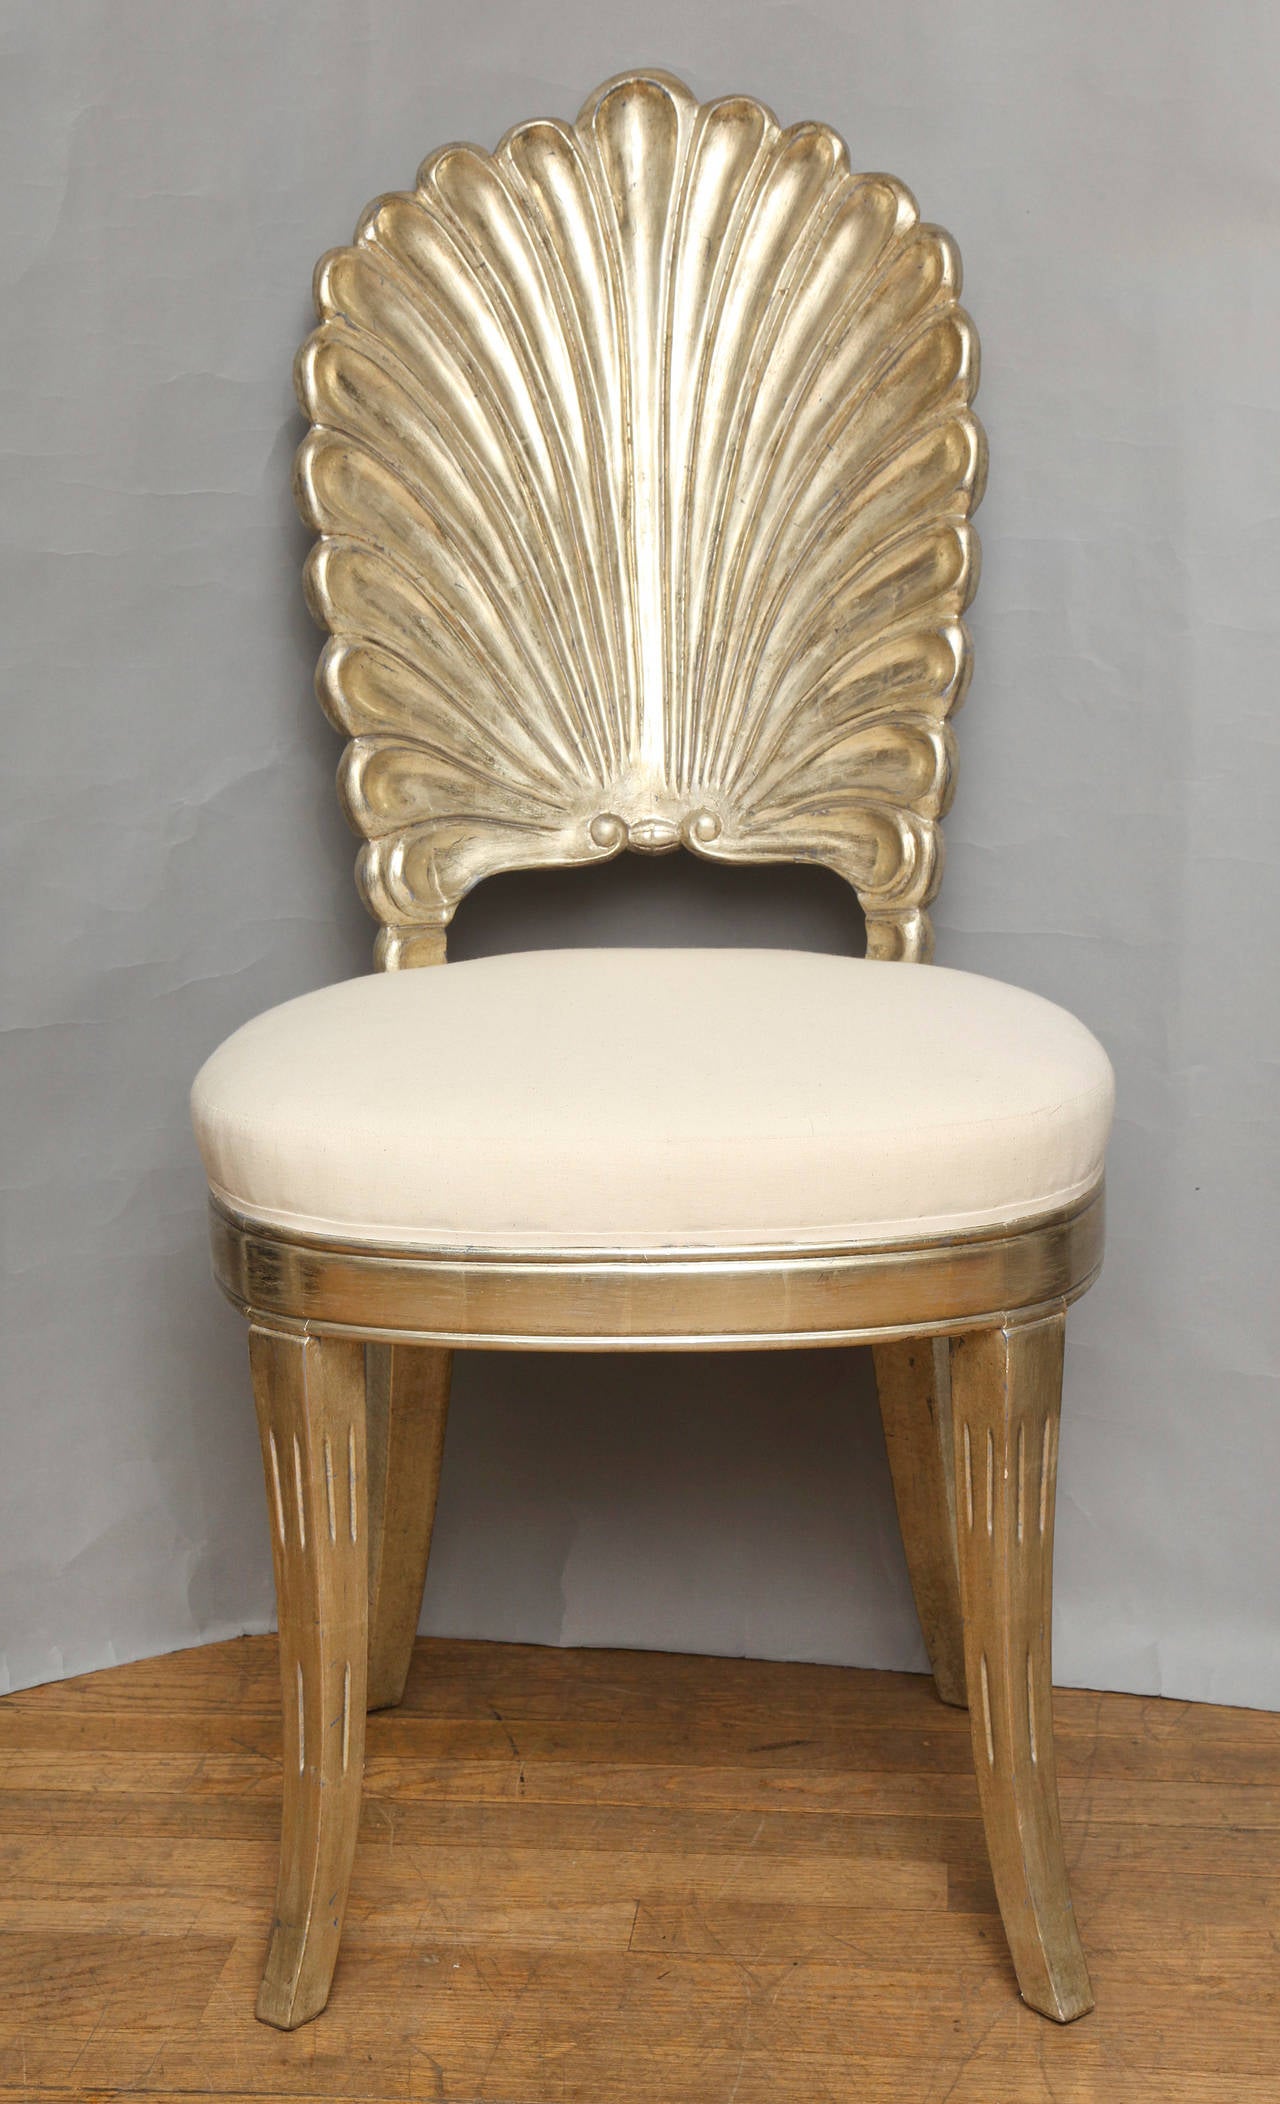 A shell back carved and white gold leafed chair having four sabre legs and upholstered seat. (7 available).